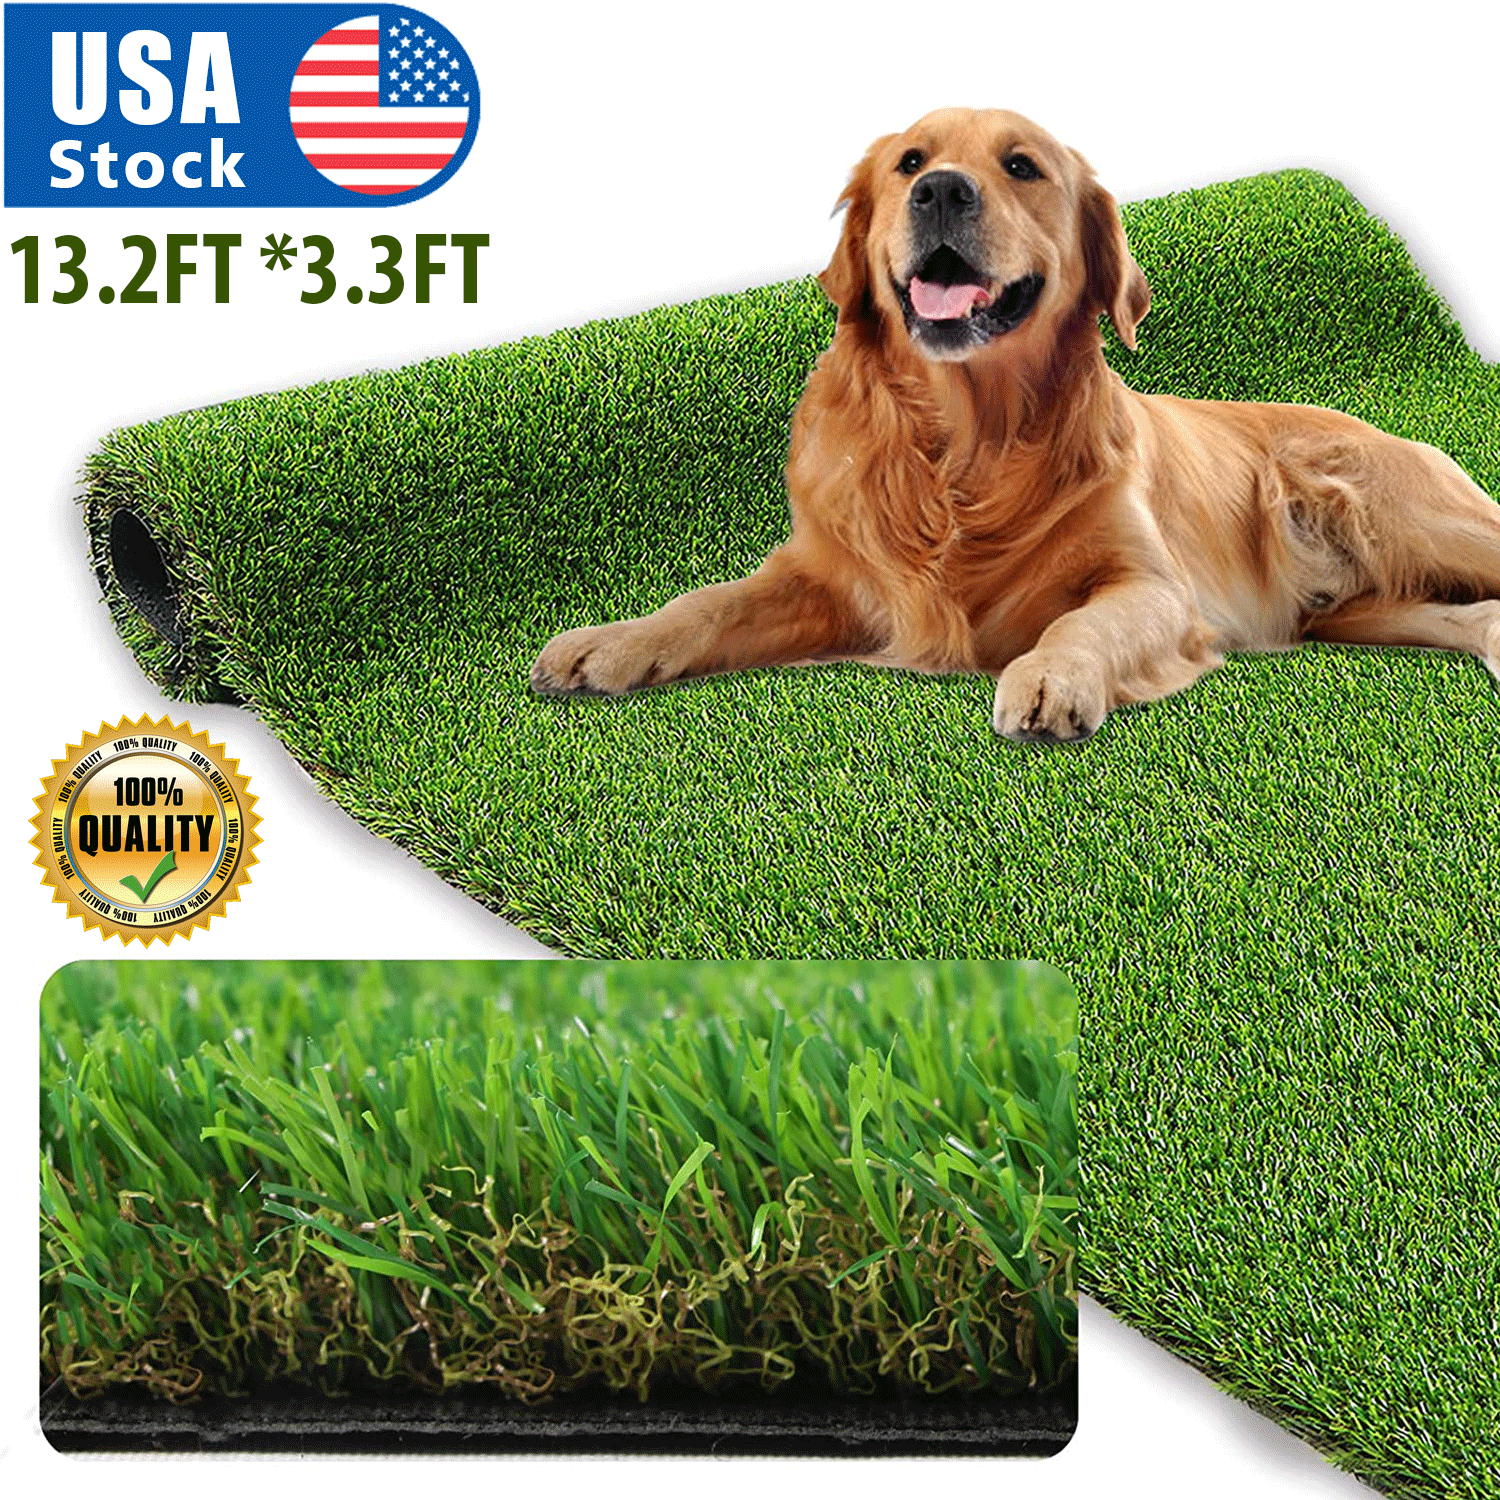 Artificial Grass Mat Synthetic Landscape Fake Turf Home Lawn Discount is also underway Yar New arrival